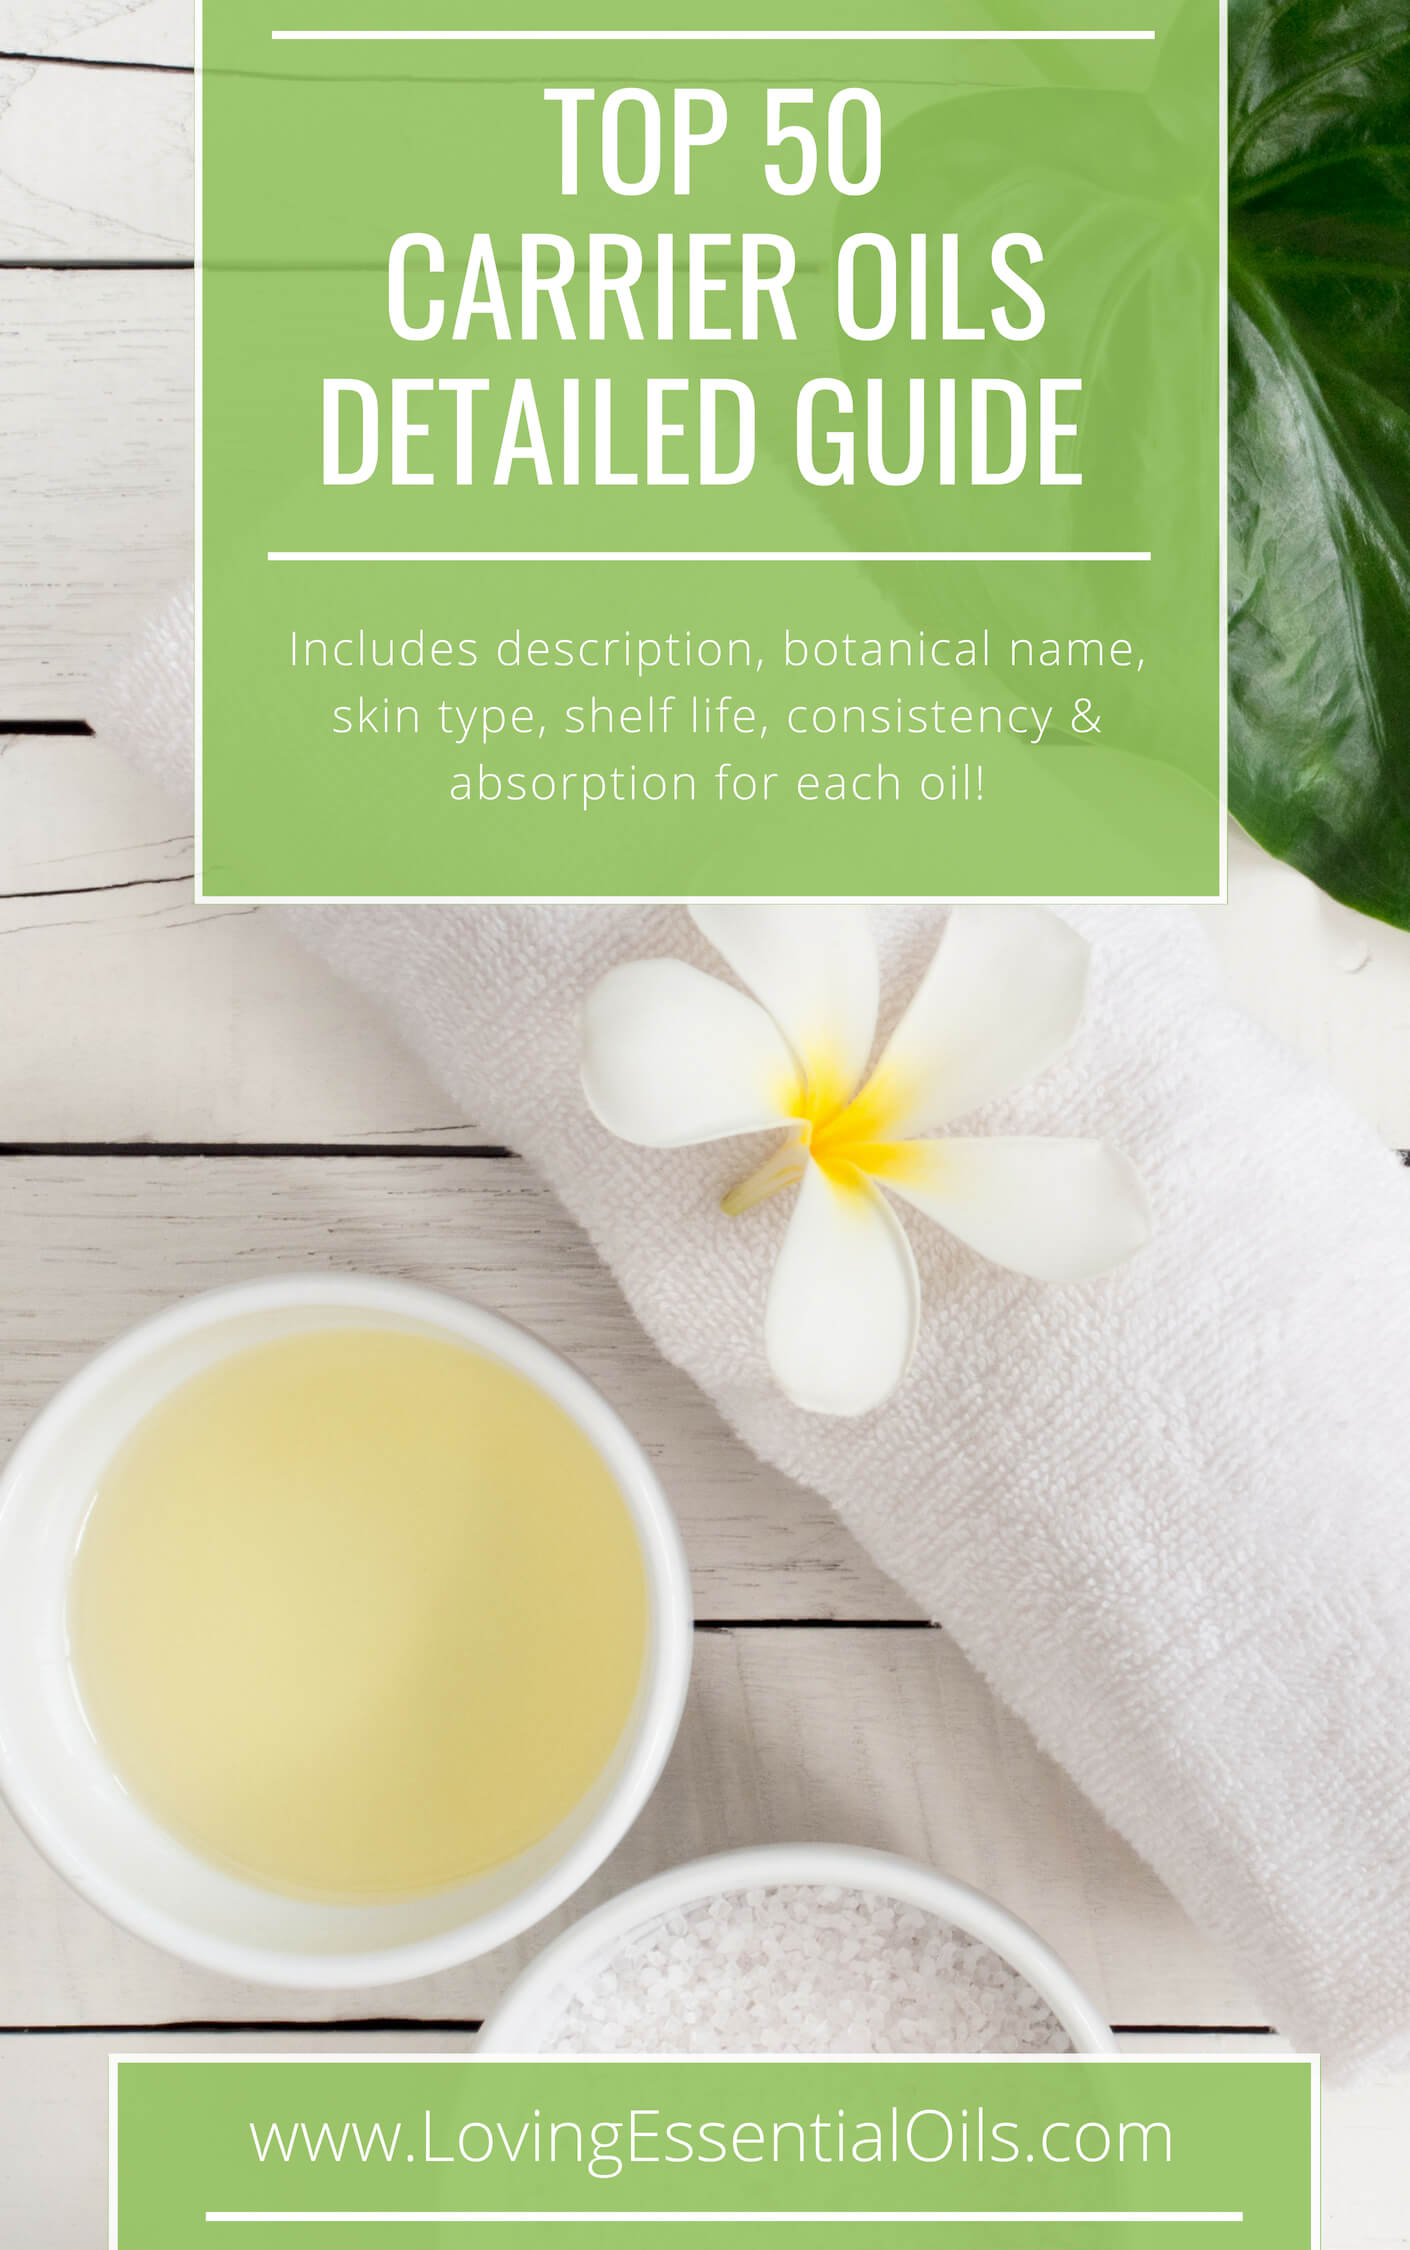 The Complete List of Carrier Oils with Free Printable Guide by Loving Essential Oils